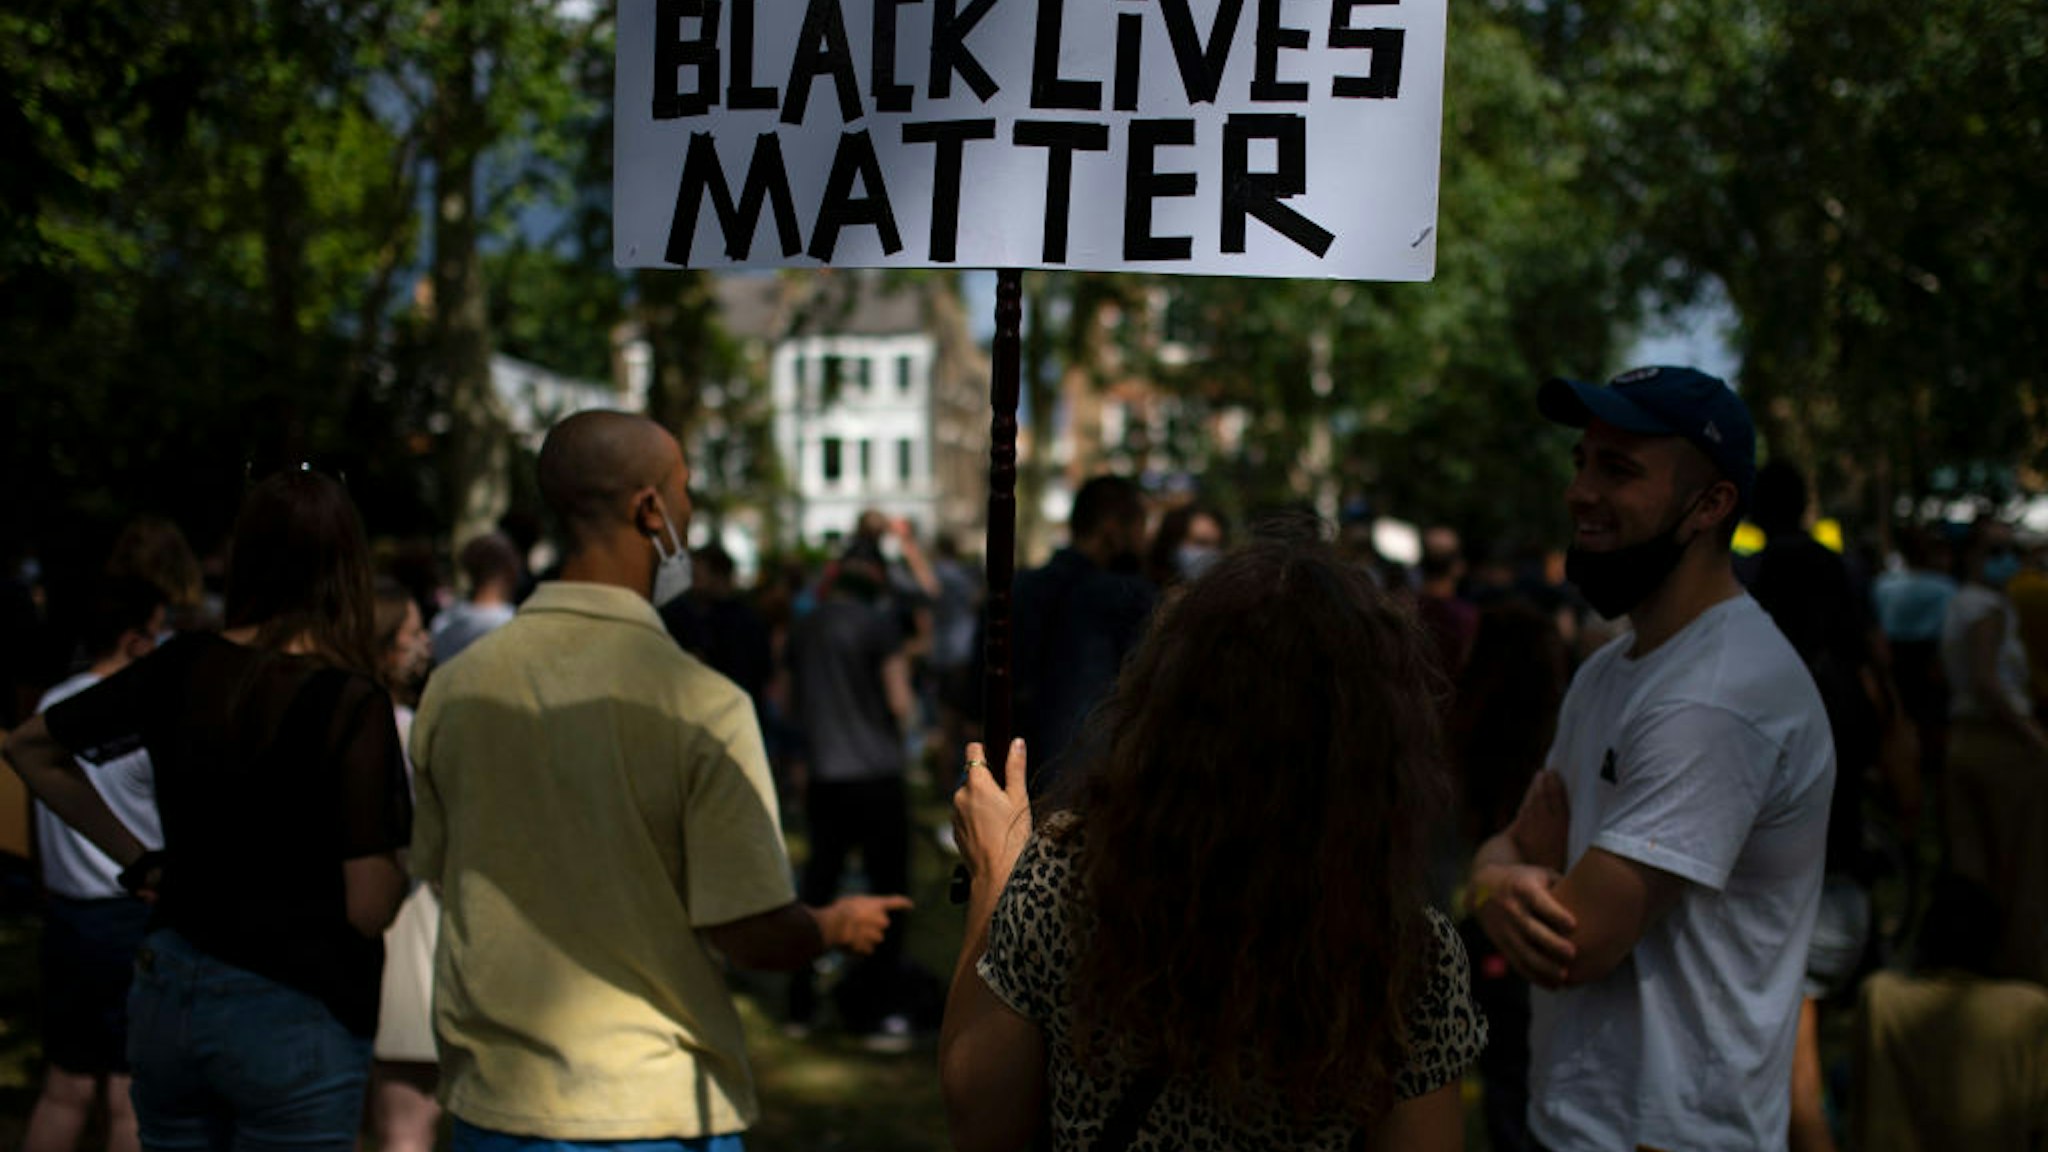 People protest during a Black Lives Matter rally in Newington Green on June 13, 2020 in London, England.